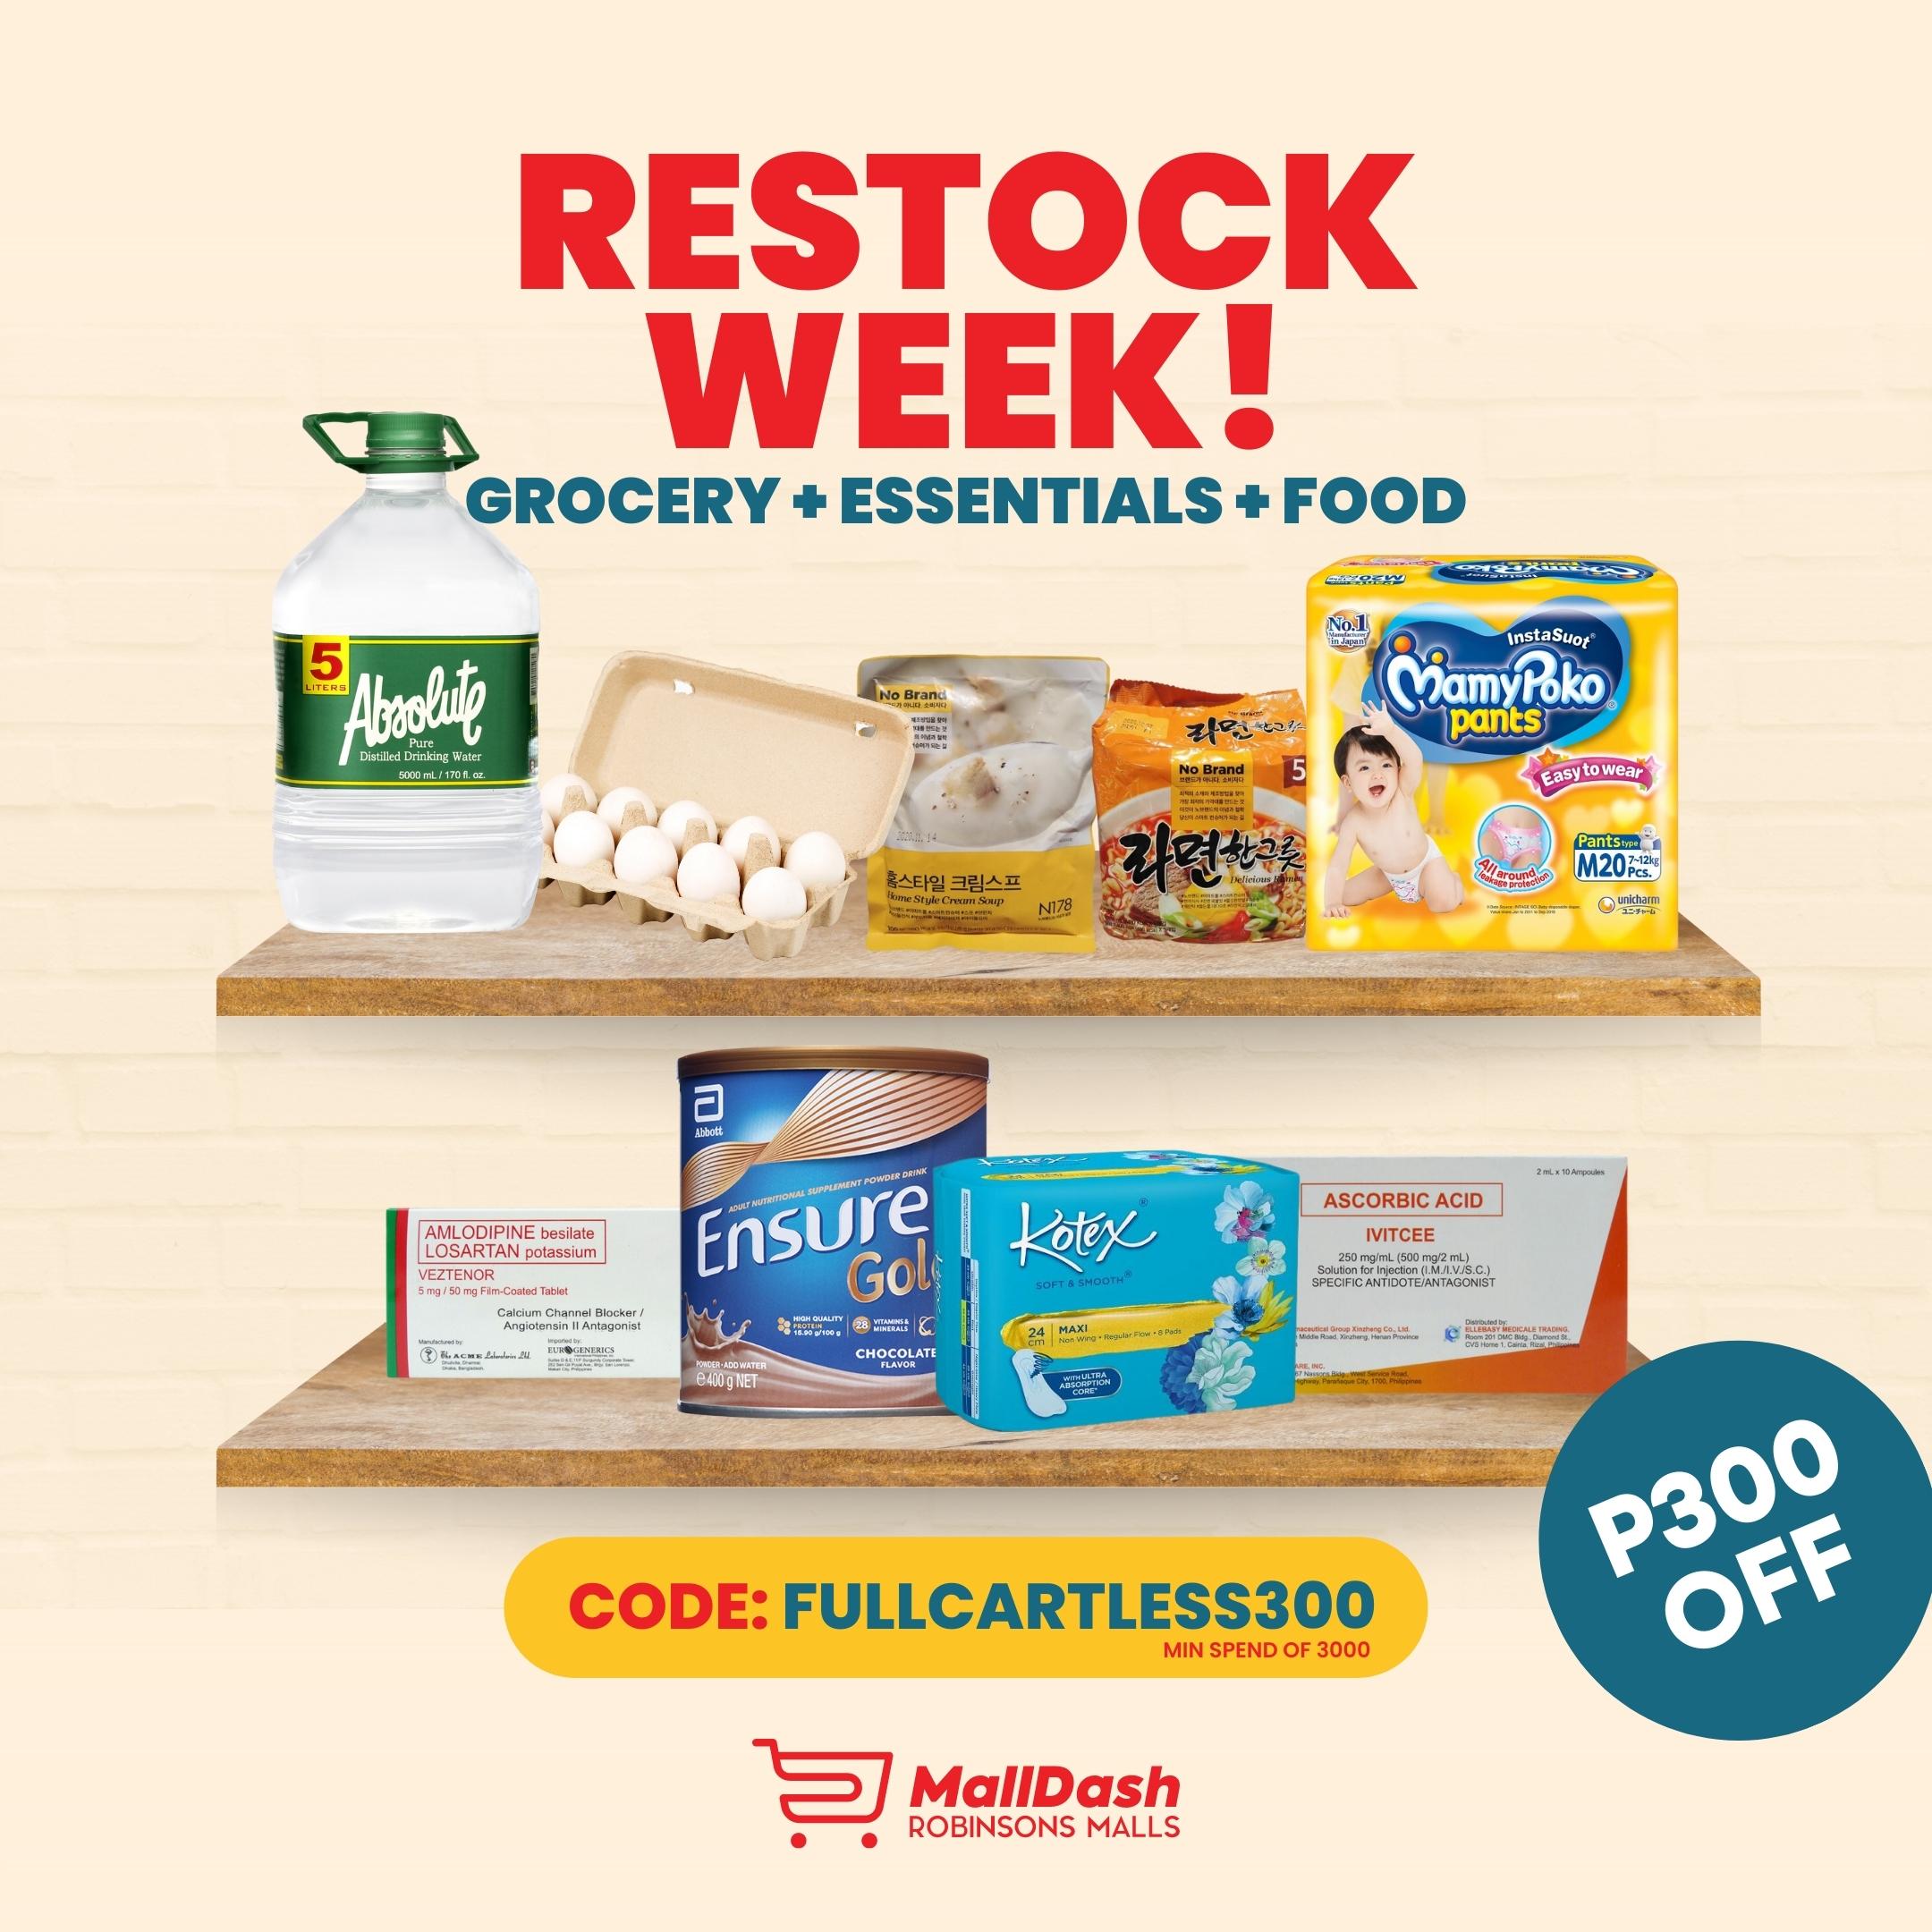 Big Savings Alert: Get P300 Off on Pantry Essentials and Everyday Must-Haves at MallDash.ph